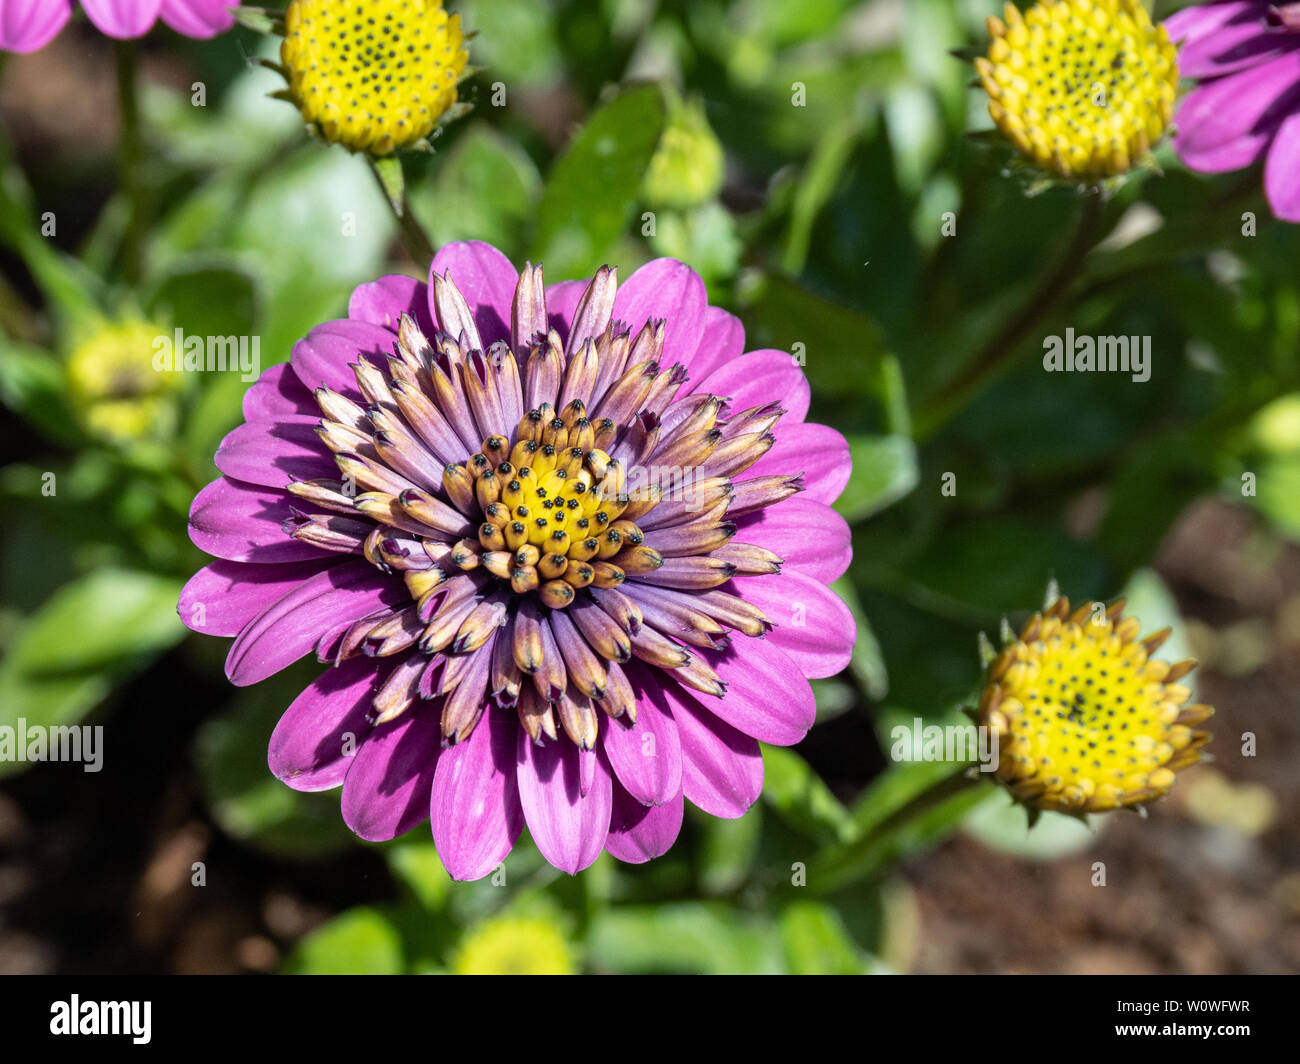 A close up of a flower of the double purple Ostespermum Double Bright Violet Stock Photo